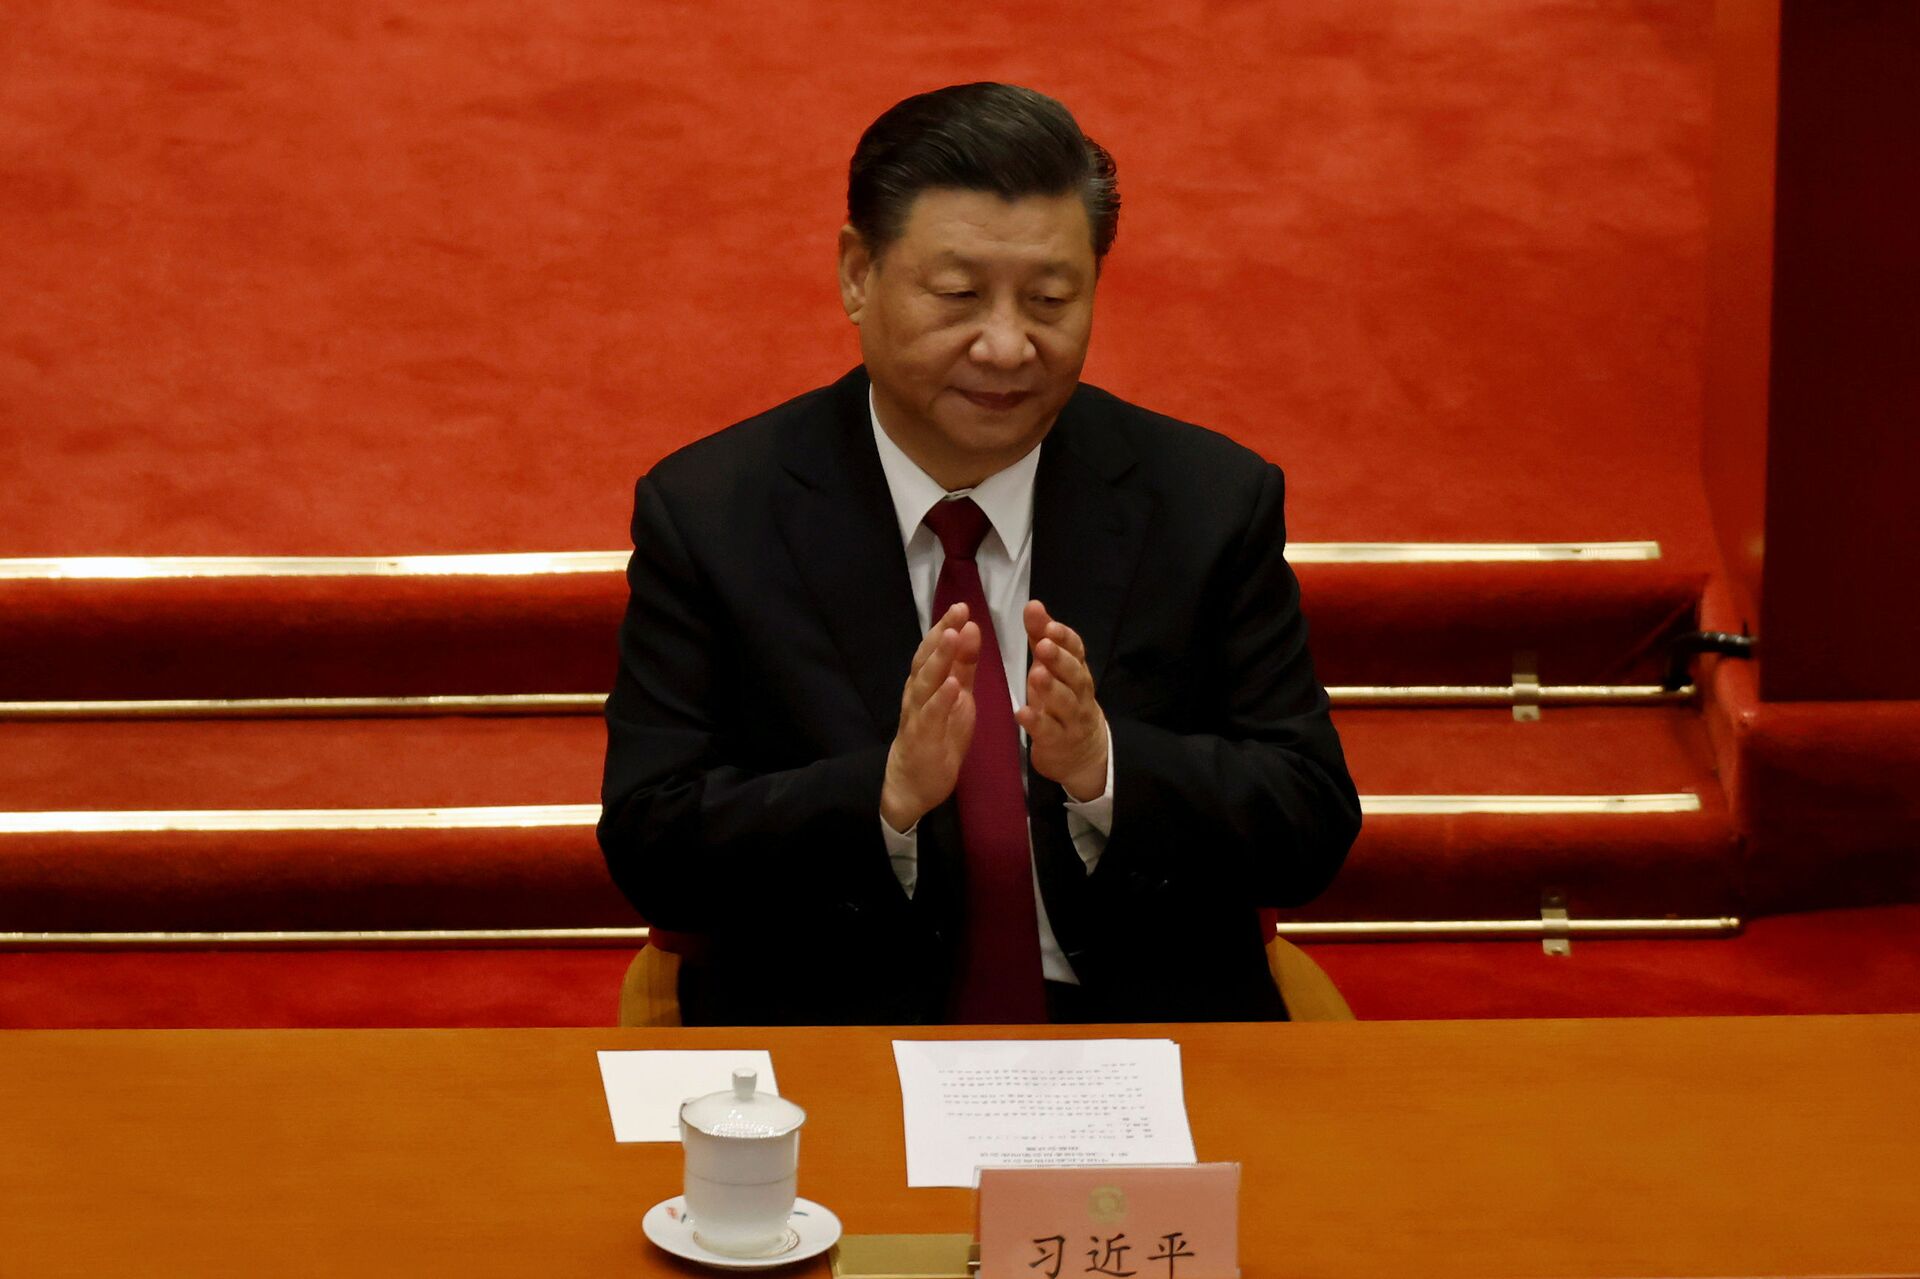 Chinese President Xi Jinping applauds at the closing session of the Chinese People's Political Consultative Conference (CPPCC) at the Great Hall of the People in Beijing, China March 10, 2021. - Sputnik International, 1920, 07.09.2021